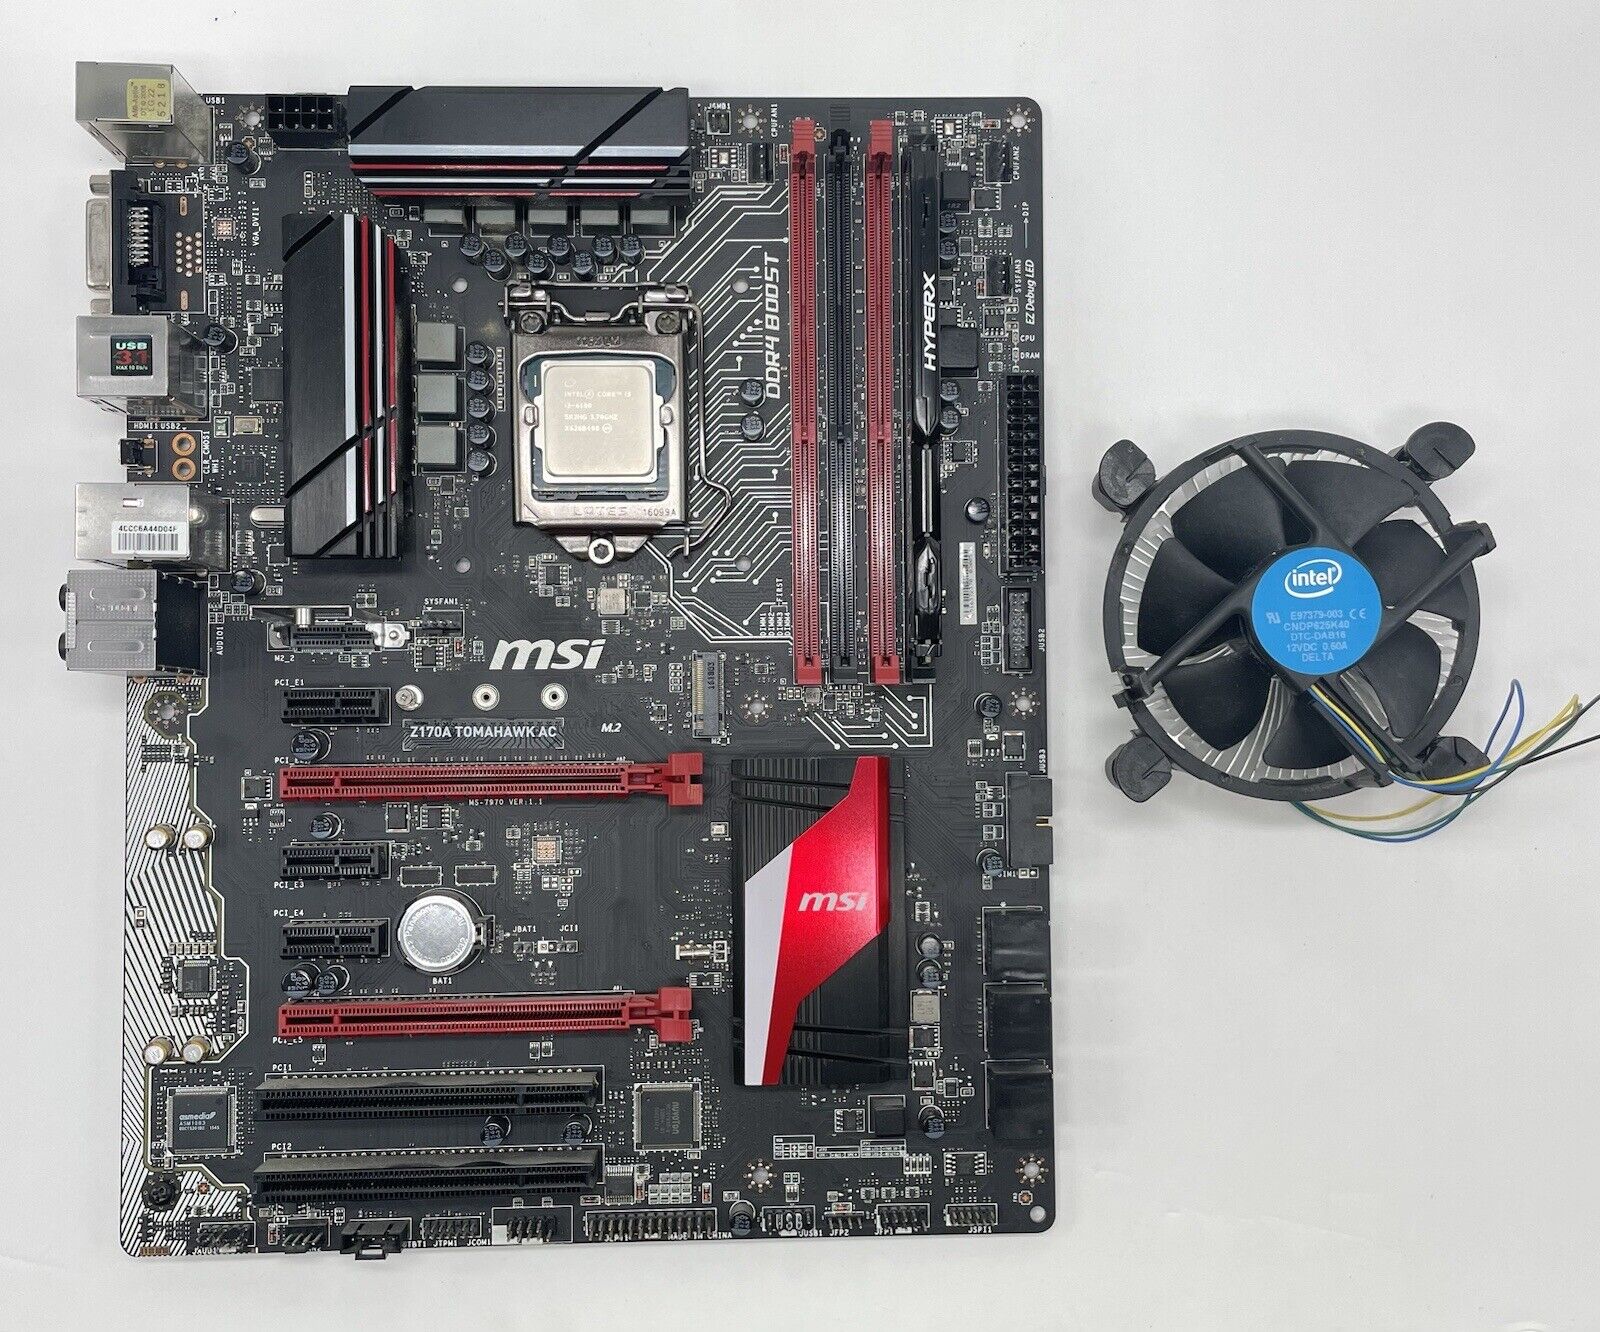 MSI Z170A Tomahawk Gaming Motherboard with Intel CPU, HyperX RAM & Fan - AS IS